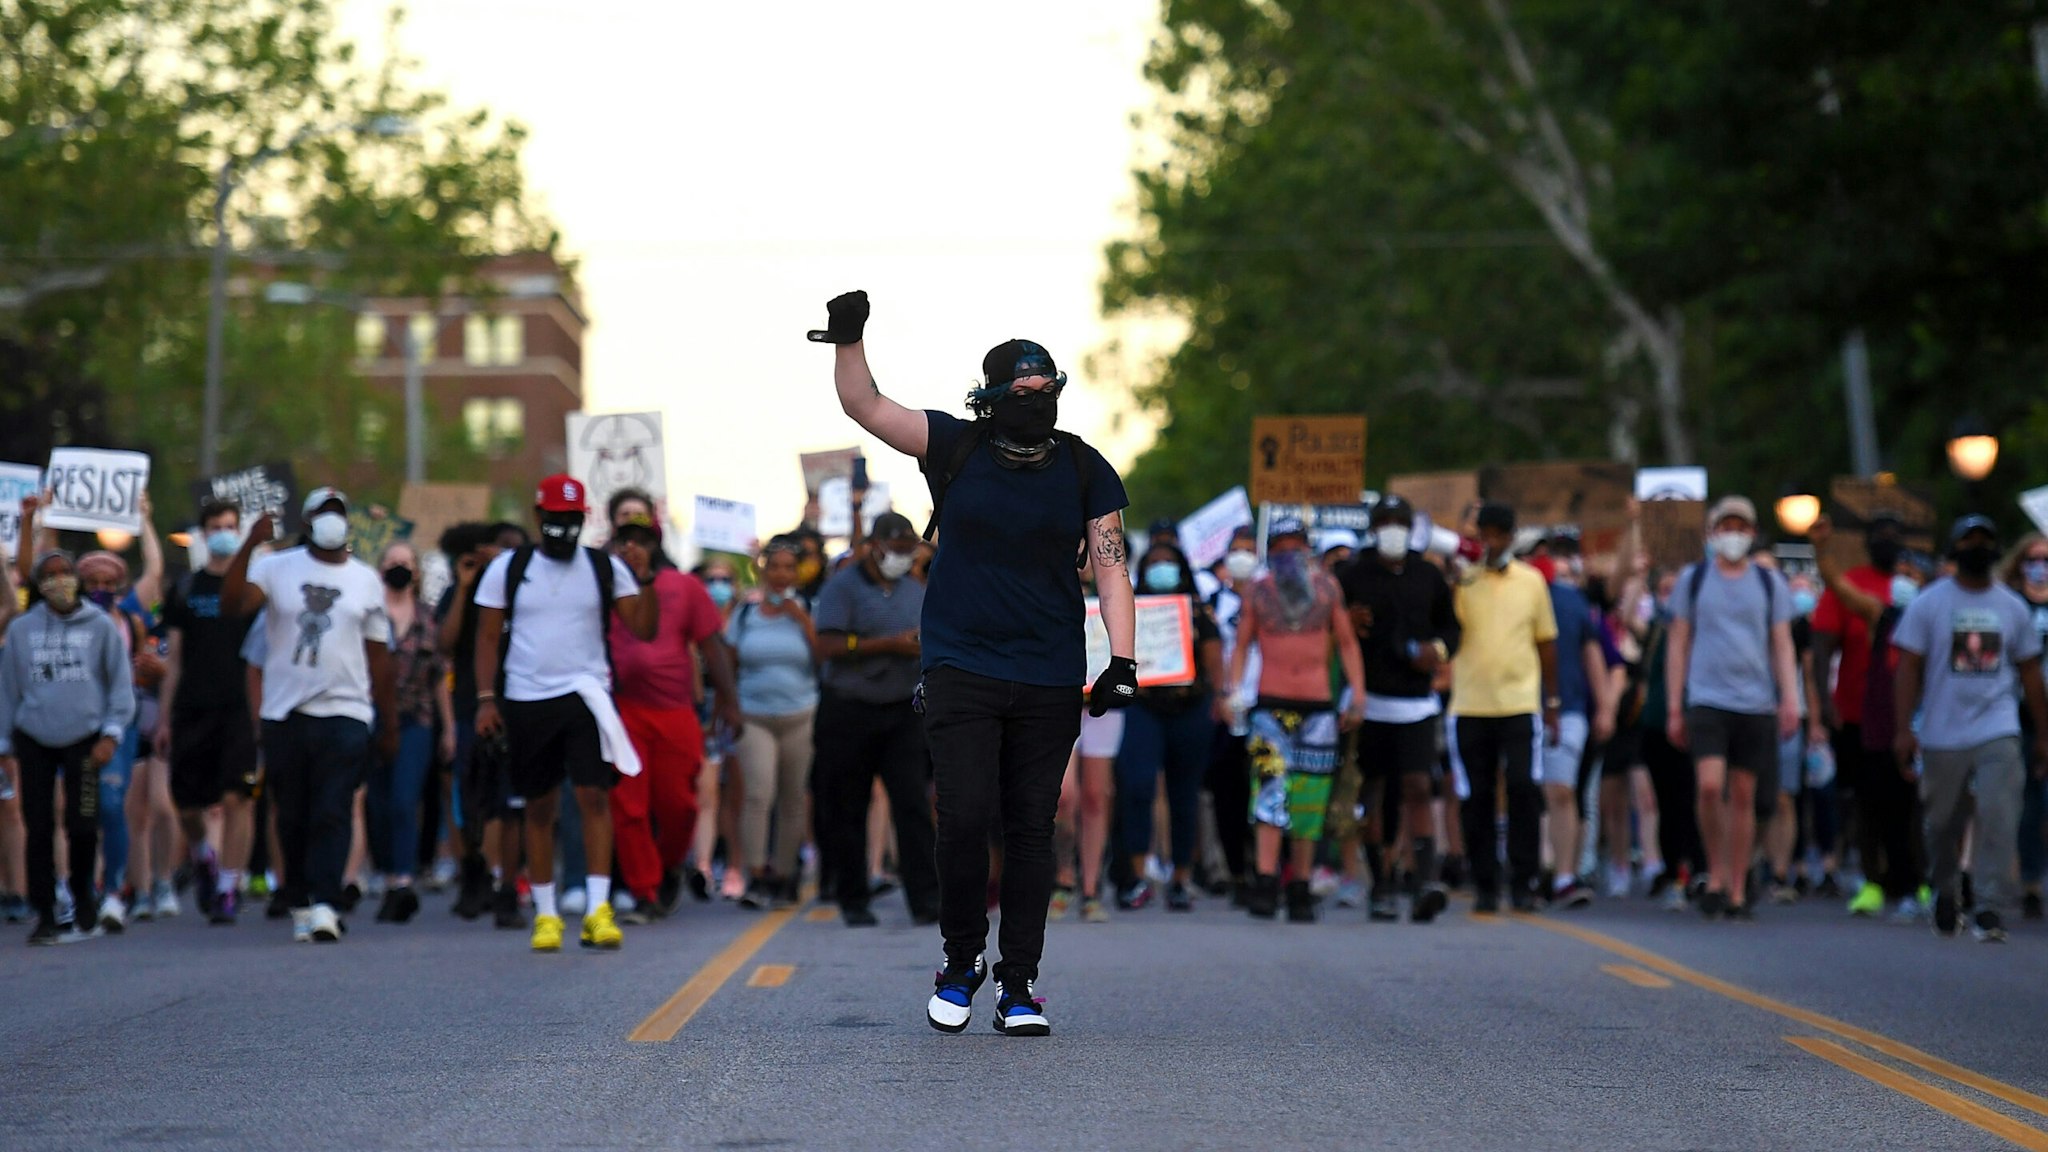 UNIVERSITY CITY, MO - JUNE 12: Protesters take to the street to protest against police brutality on June 12, 2020 in University City, Missouri. Protest continue across the world since George Floyd died in Minneapolis police custody on May 25.